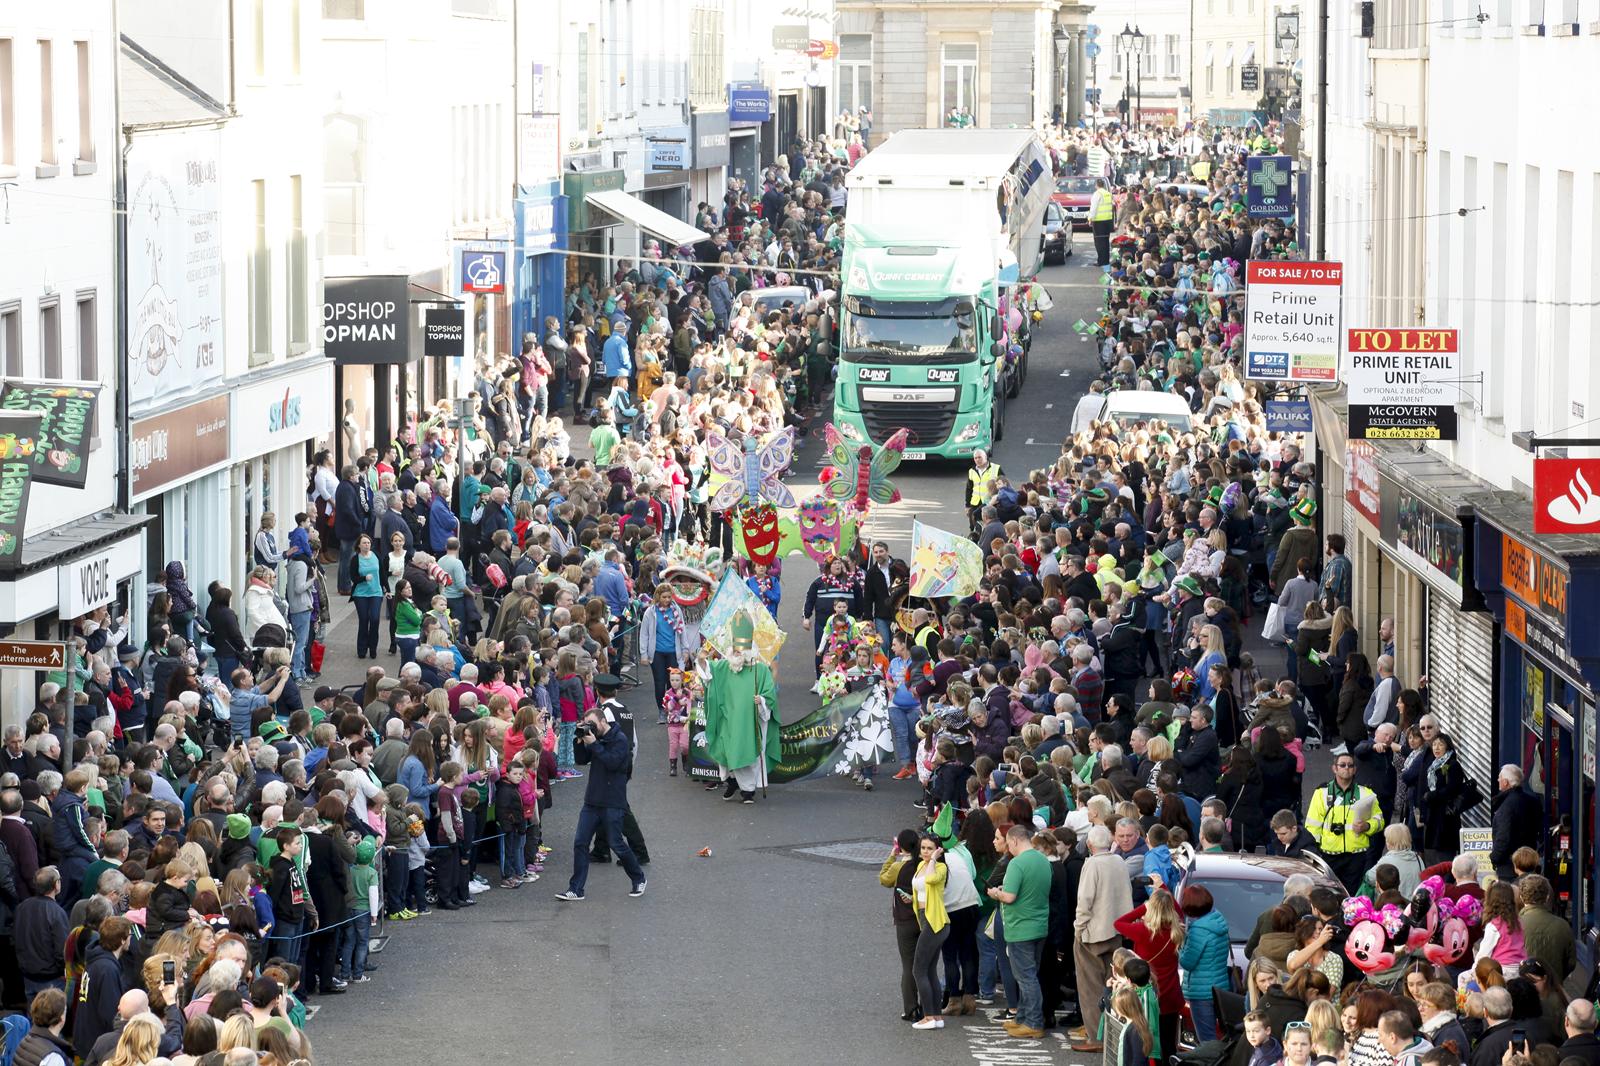 Welcome to the 7th year of Project St Patrick’s Festival and Parade!